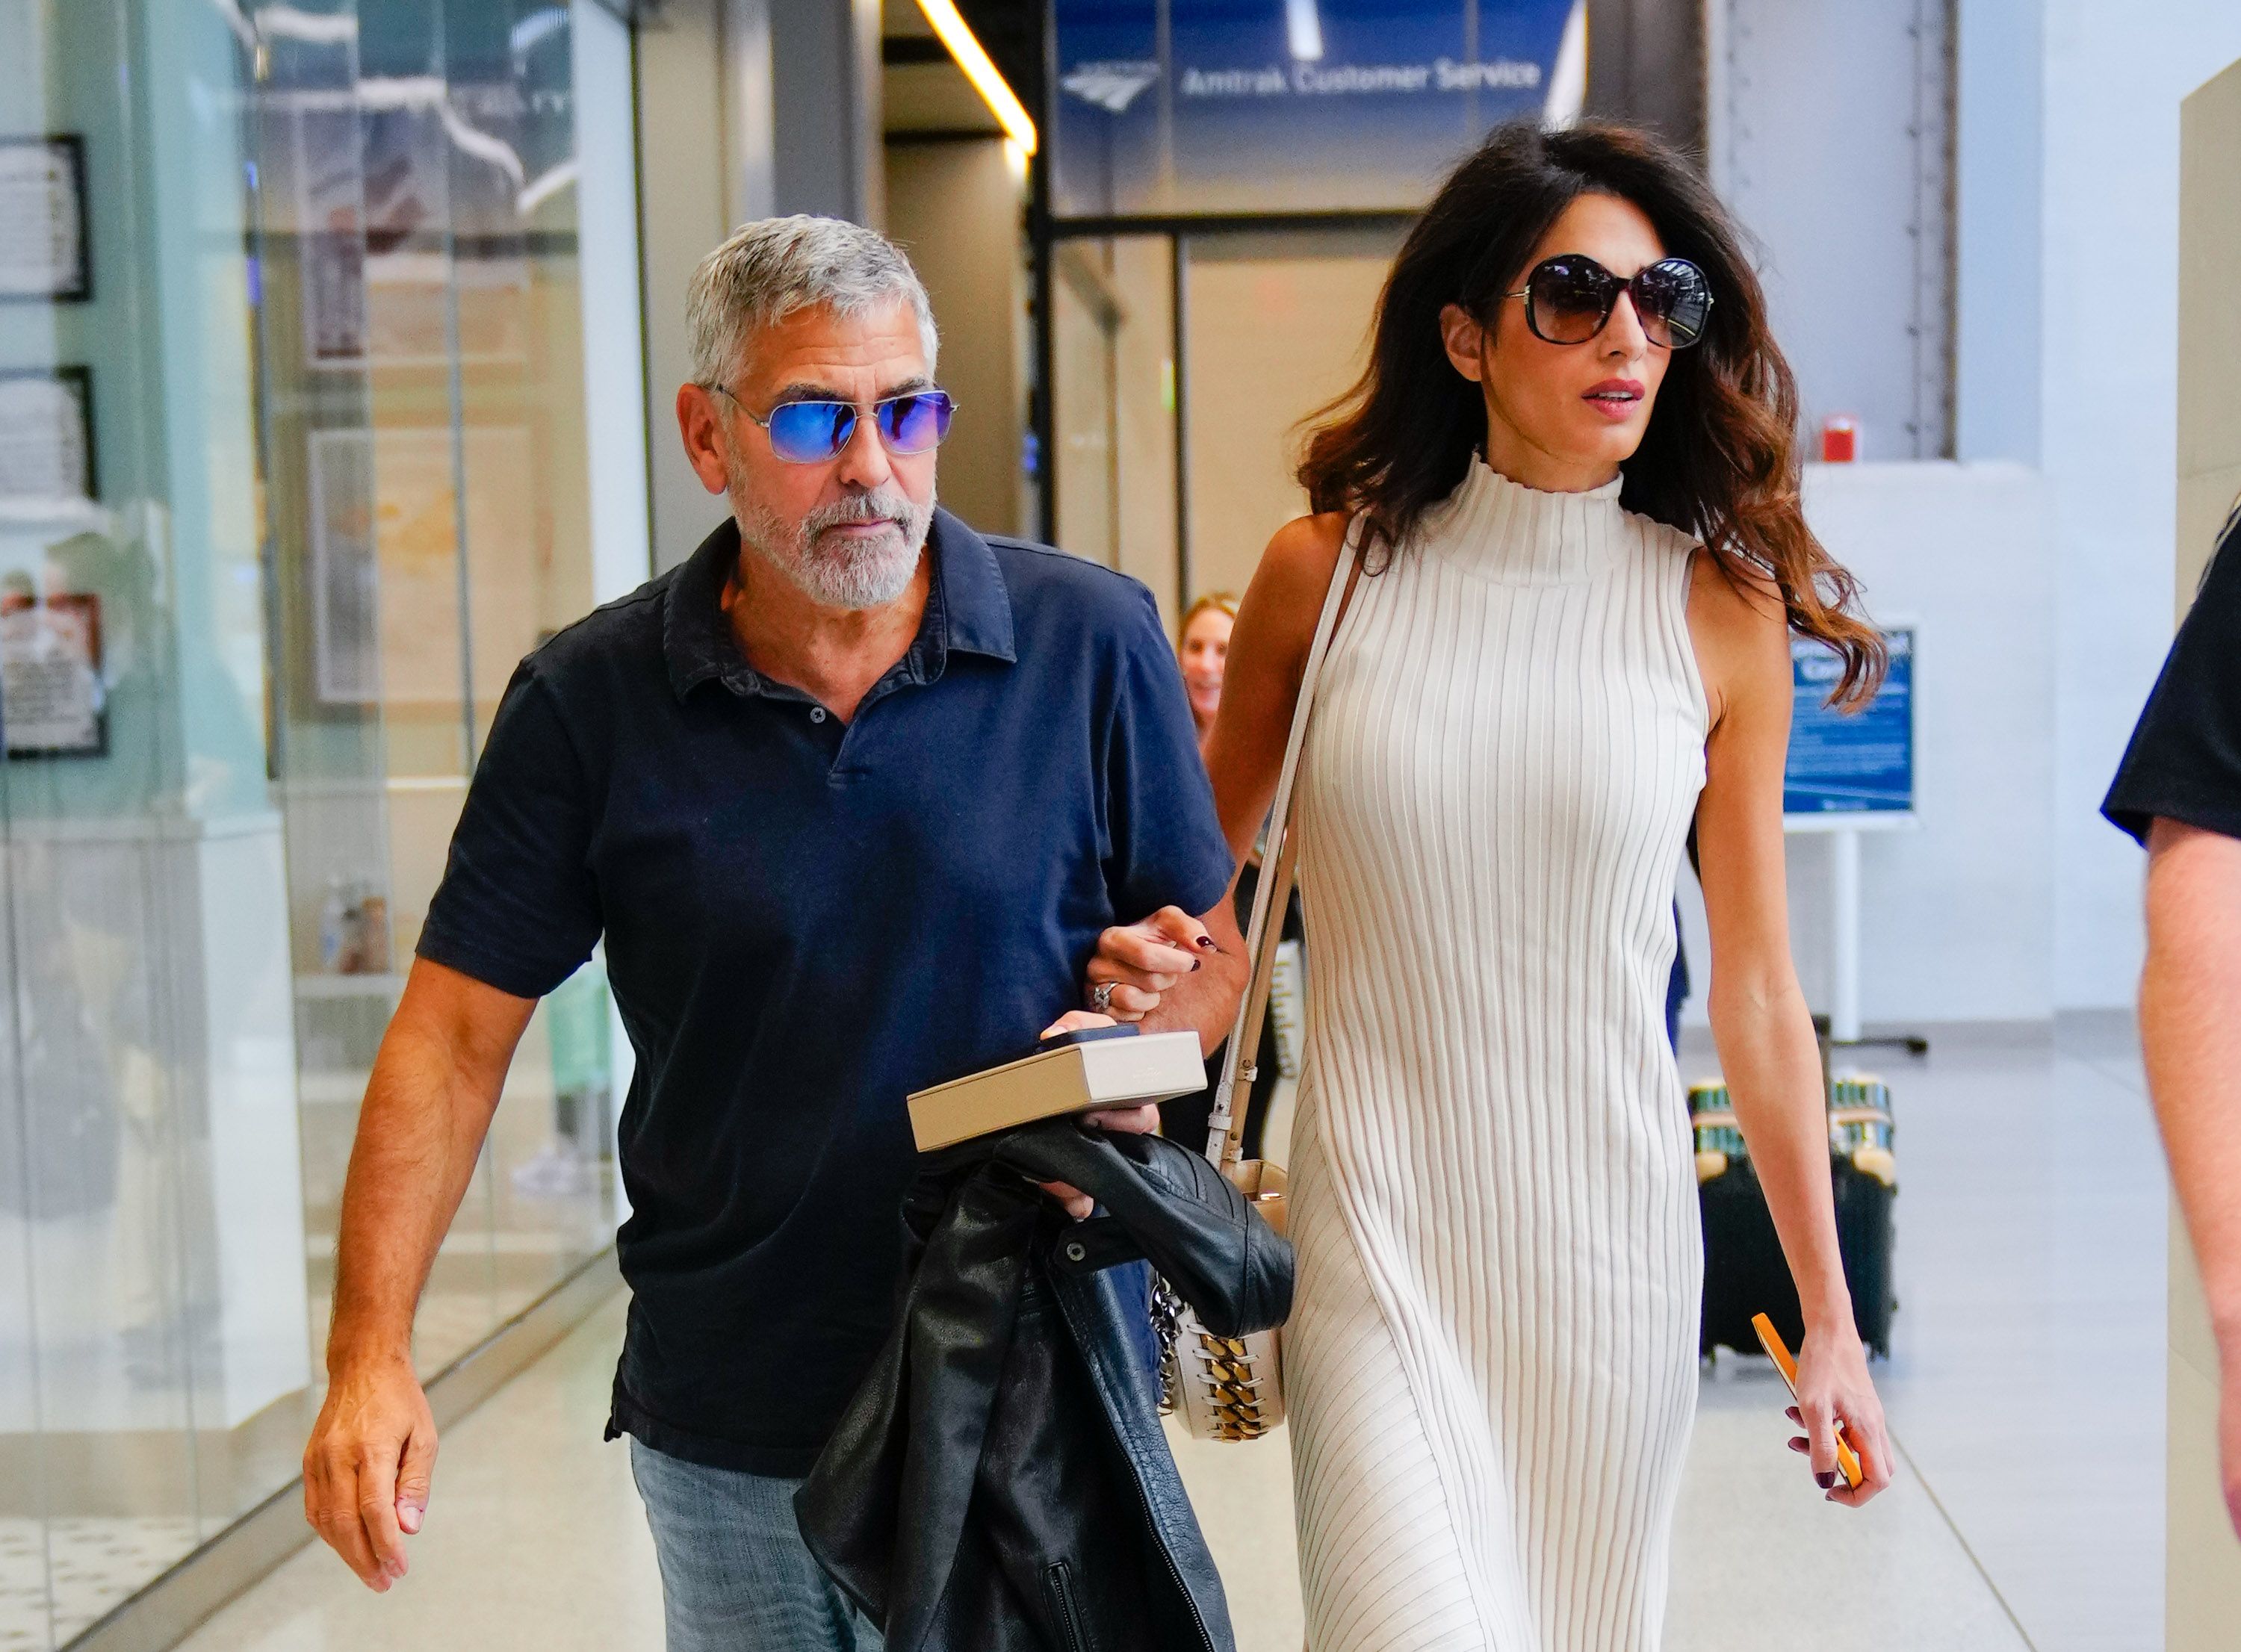 Amal Clooney Steps Out In A Fashion-Forward Neoprene Look